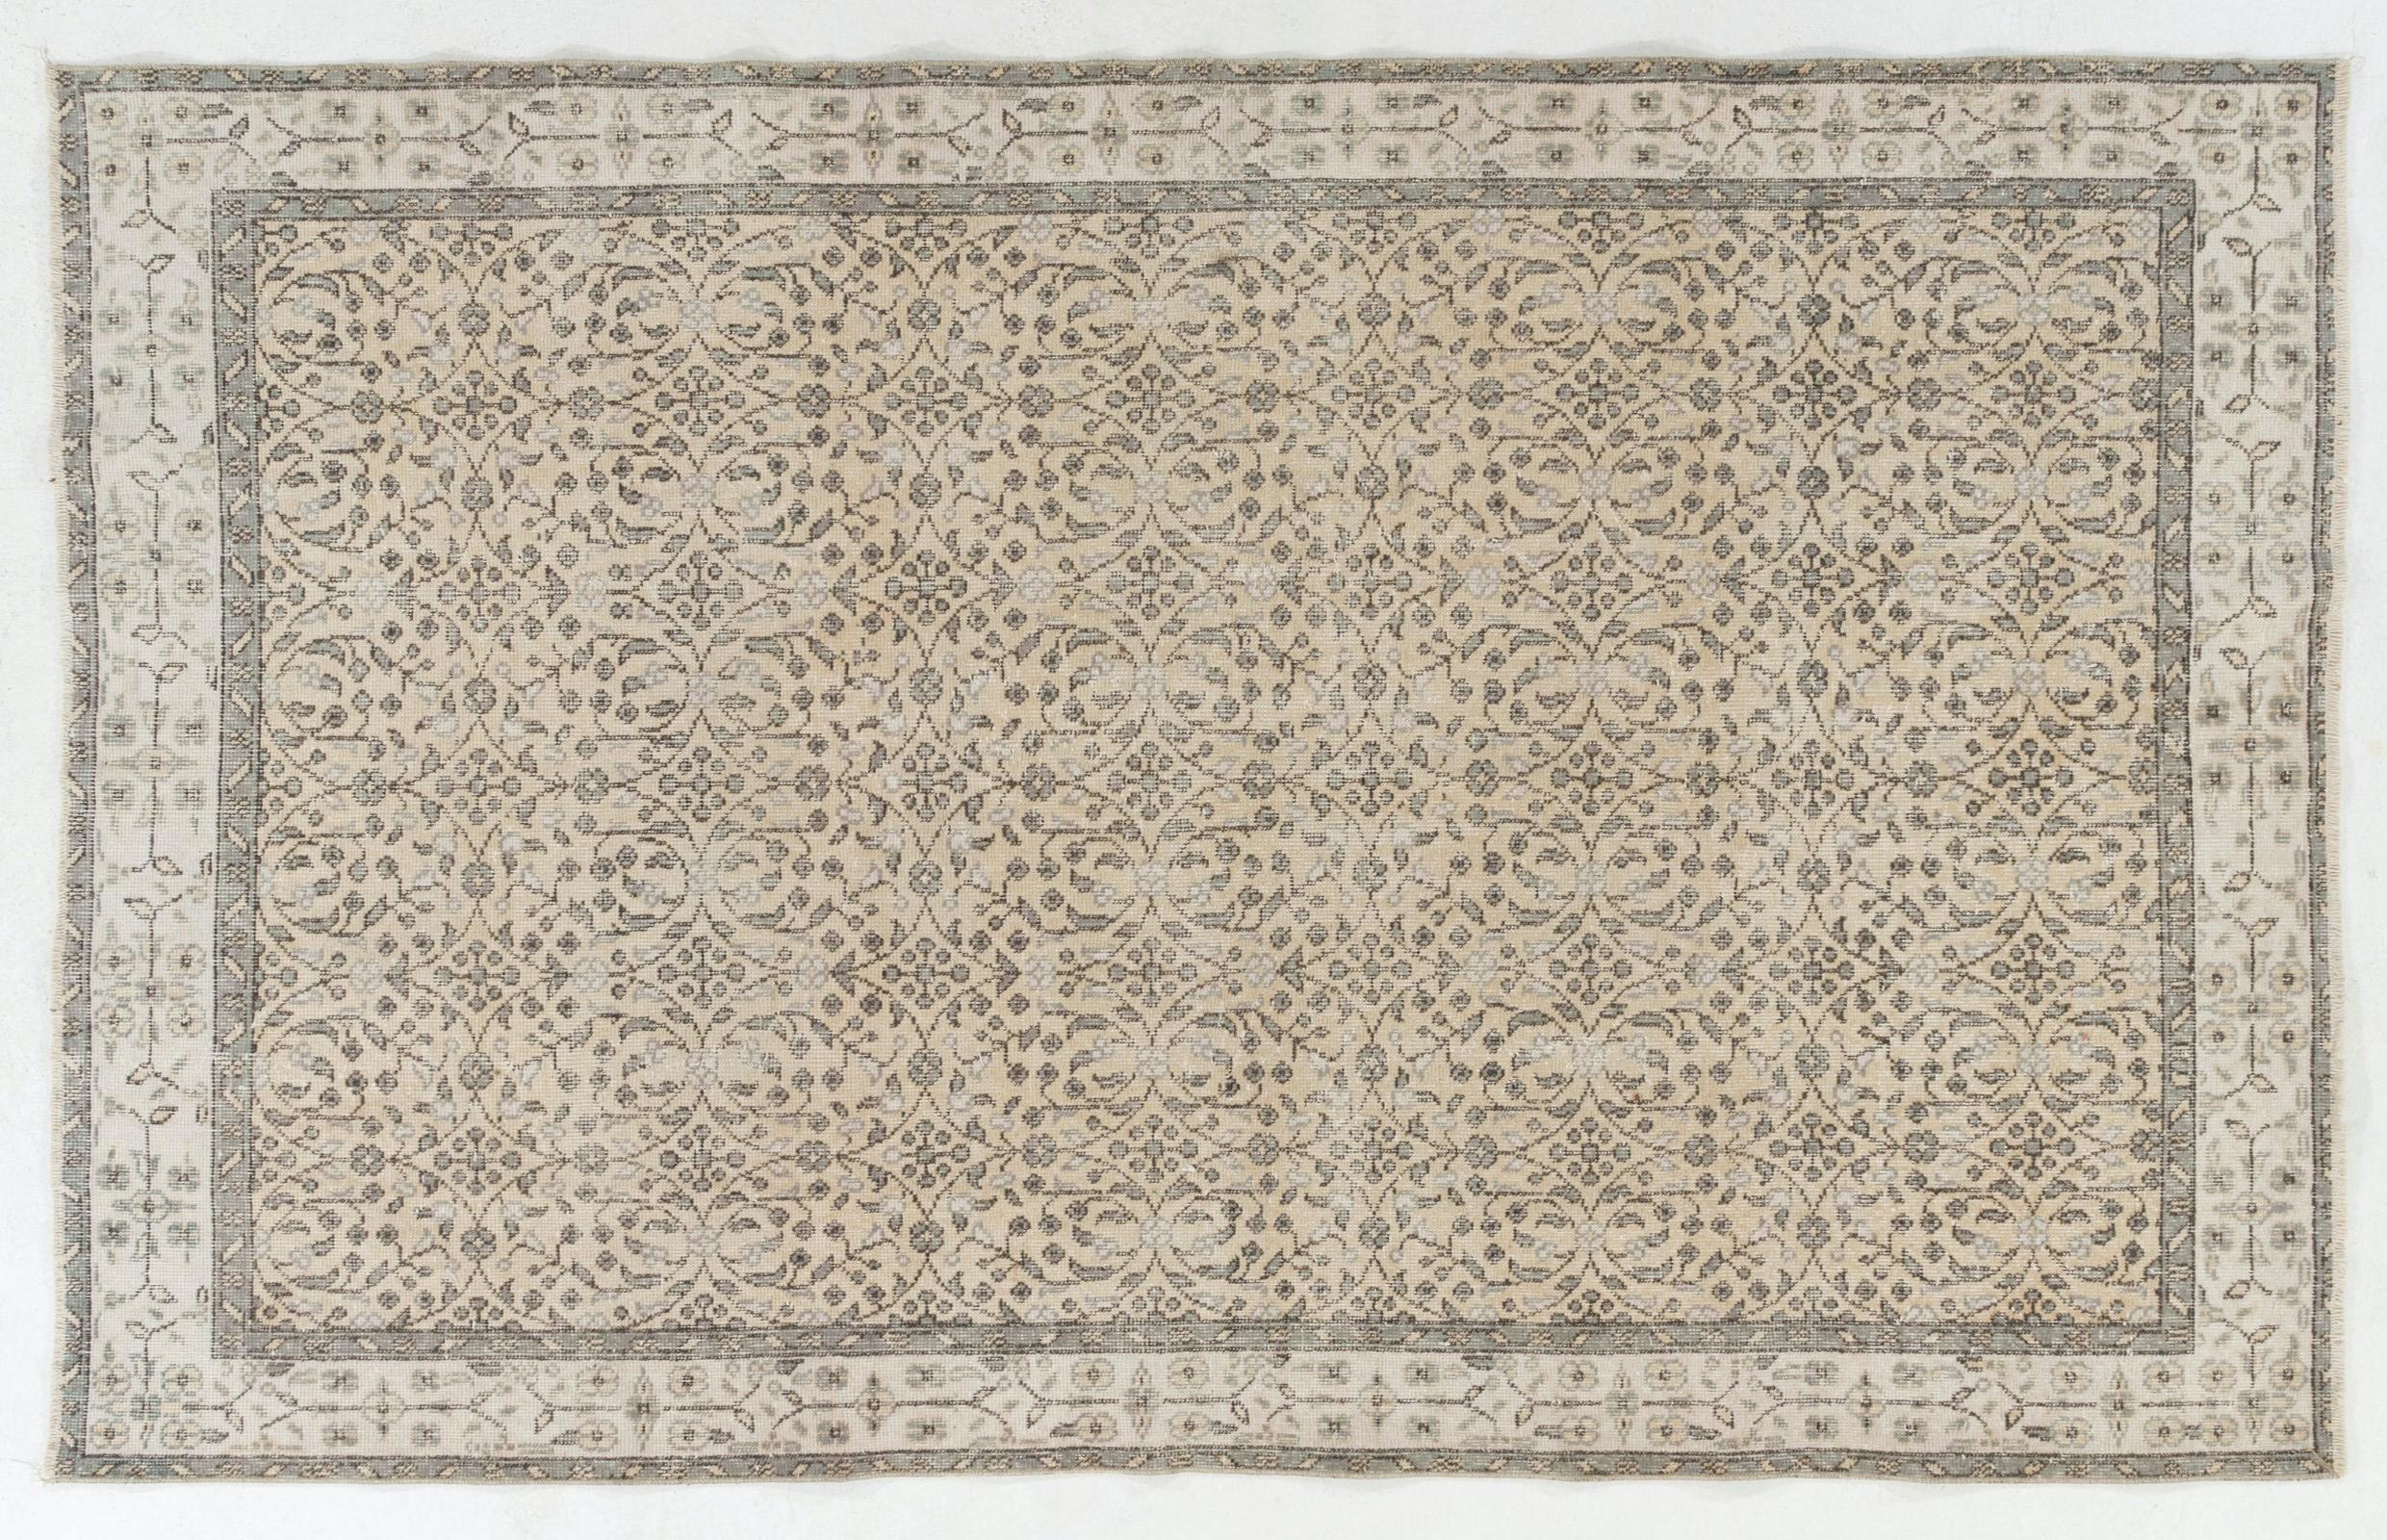 20th Century Floral Vintage Handmade Turkish Oushak Wool Rug in Soft Colors